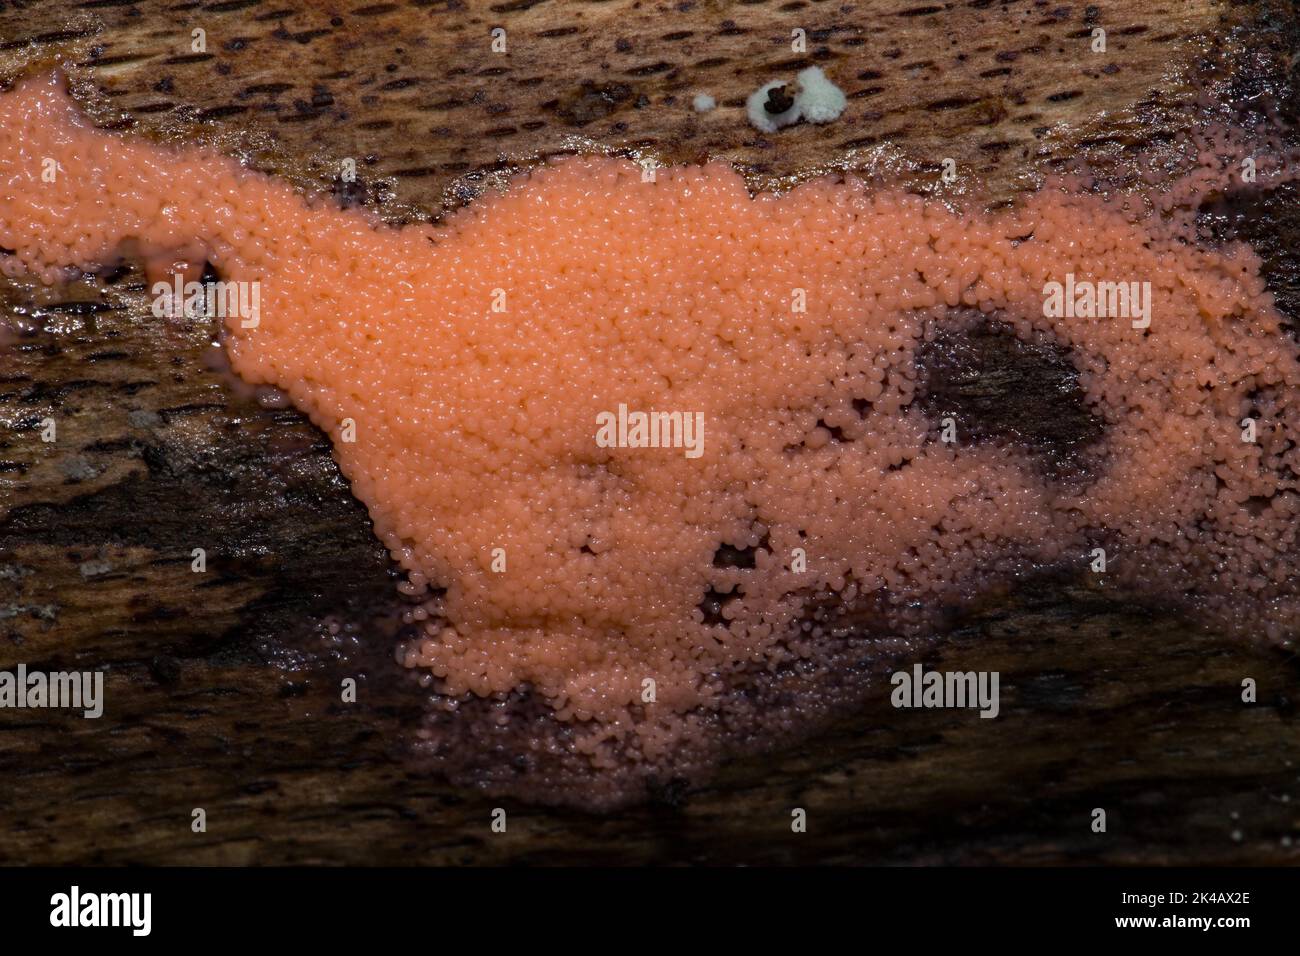 Red ball slime mould many pink fruiting bodies next to each other on tree trunk Stock Photo